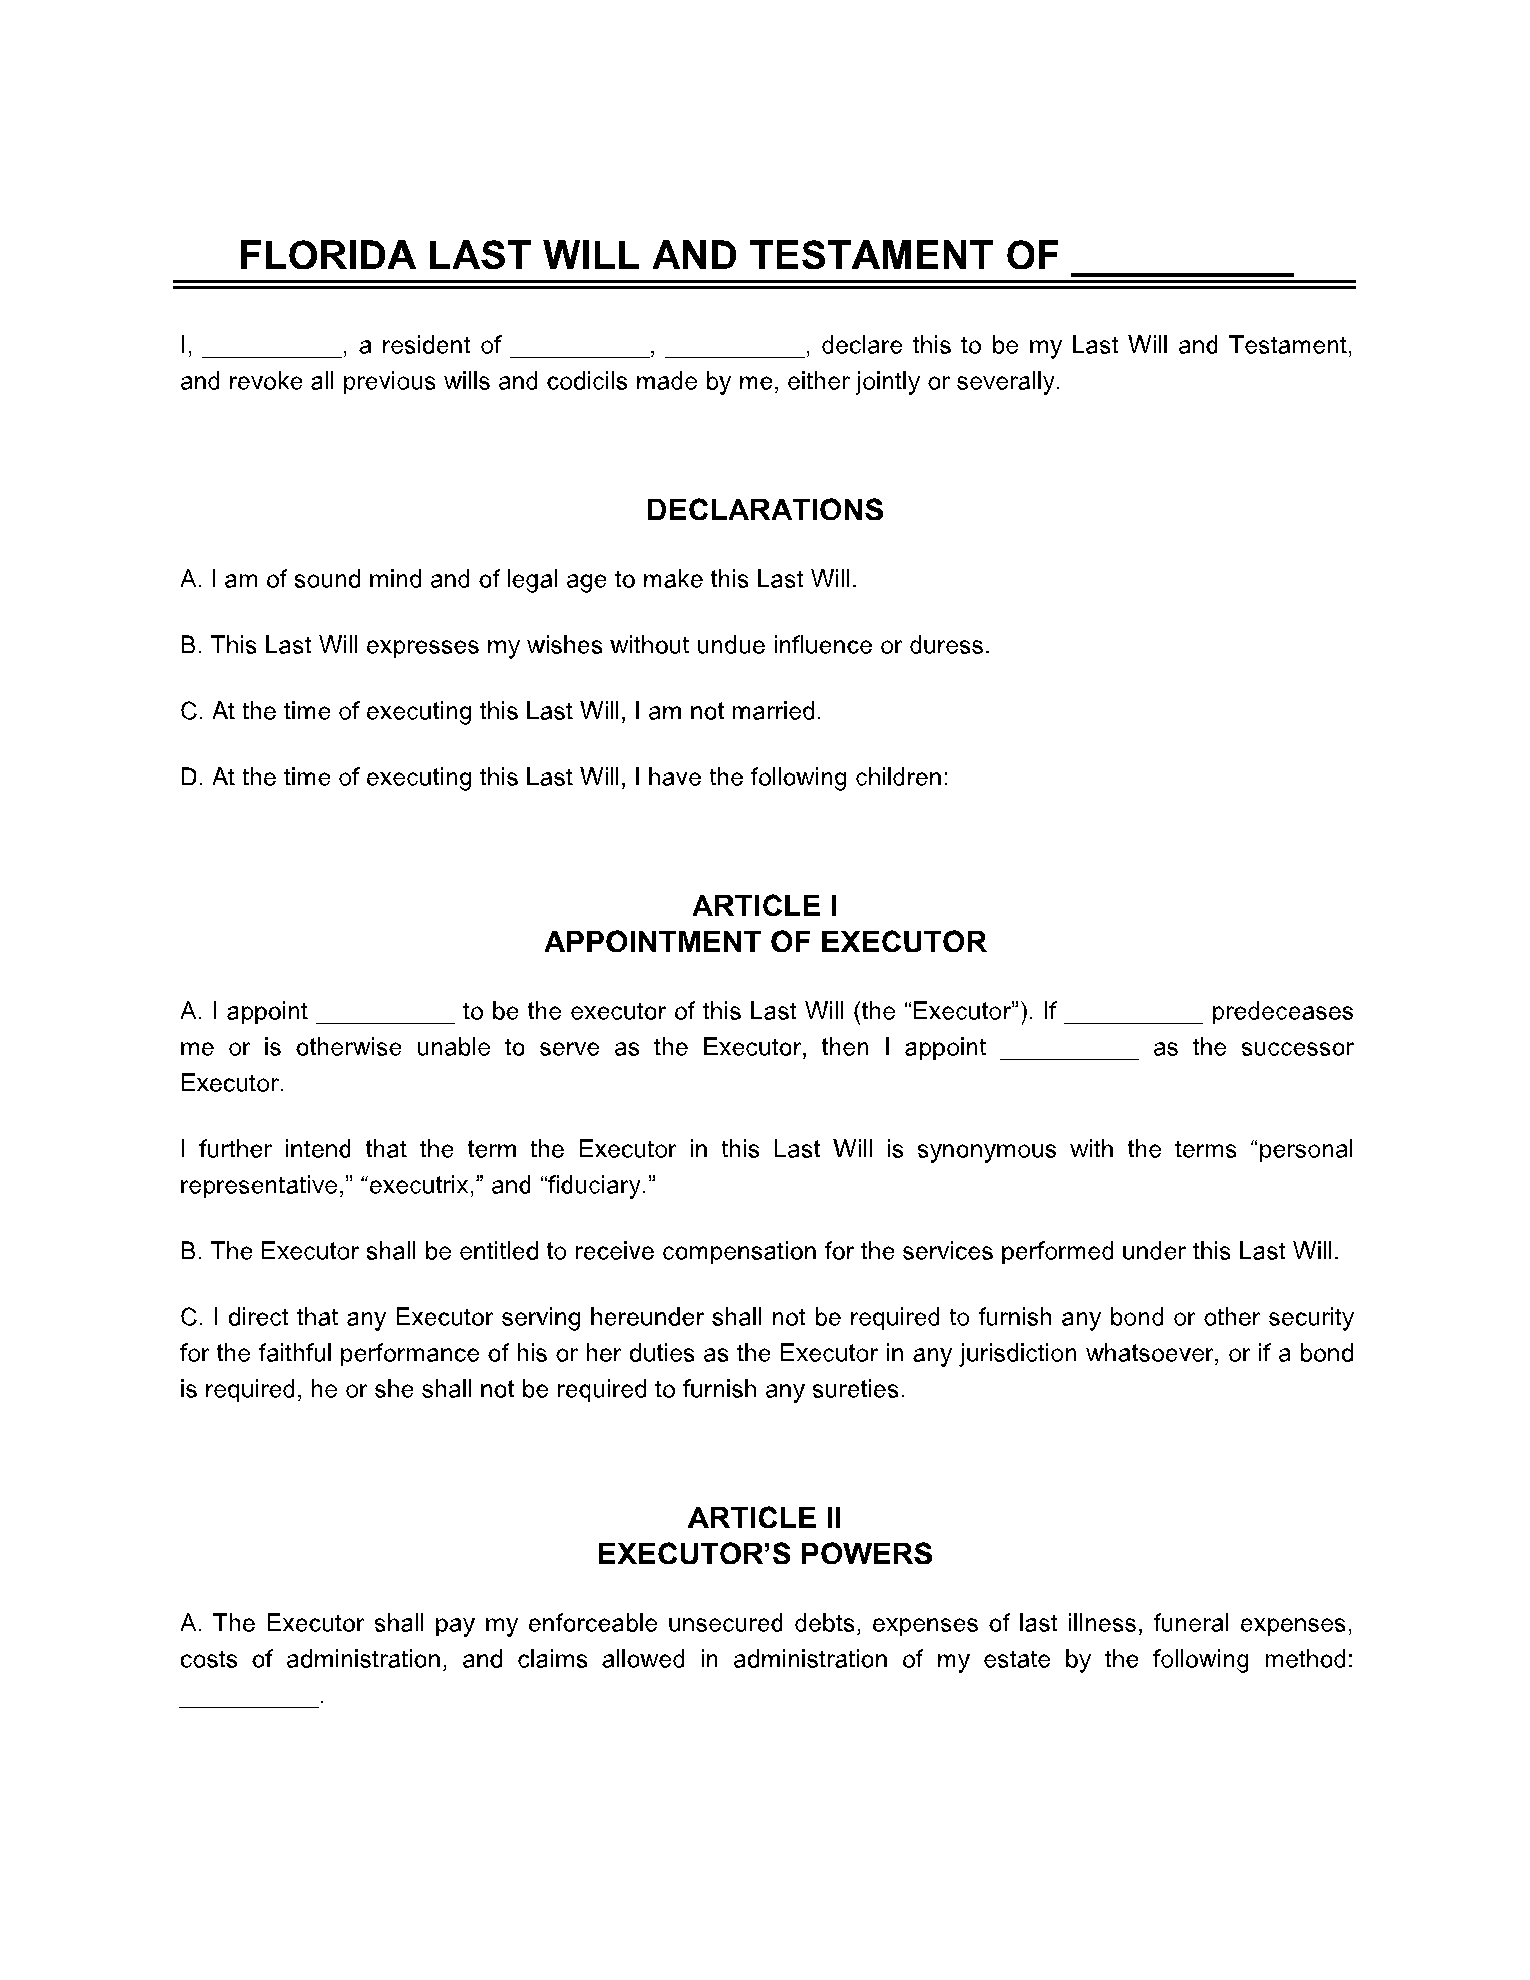 Last Will And Testament Florida 1